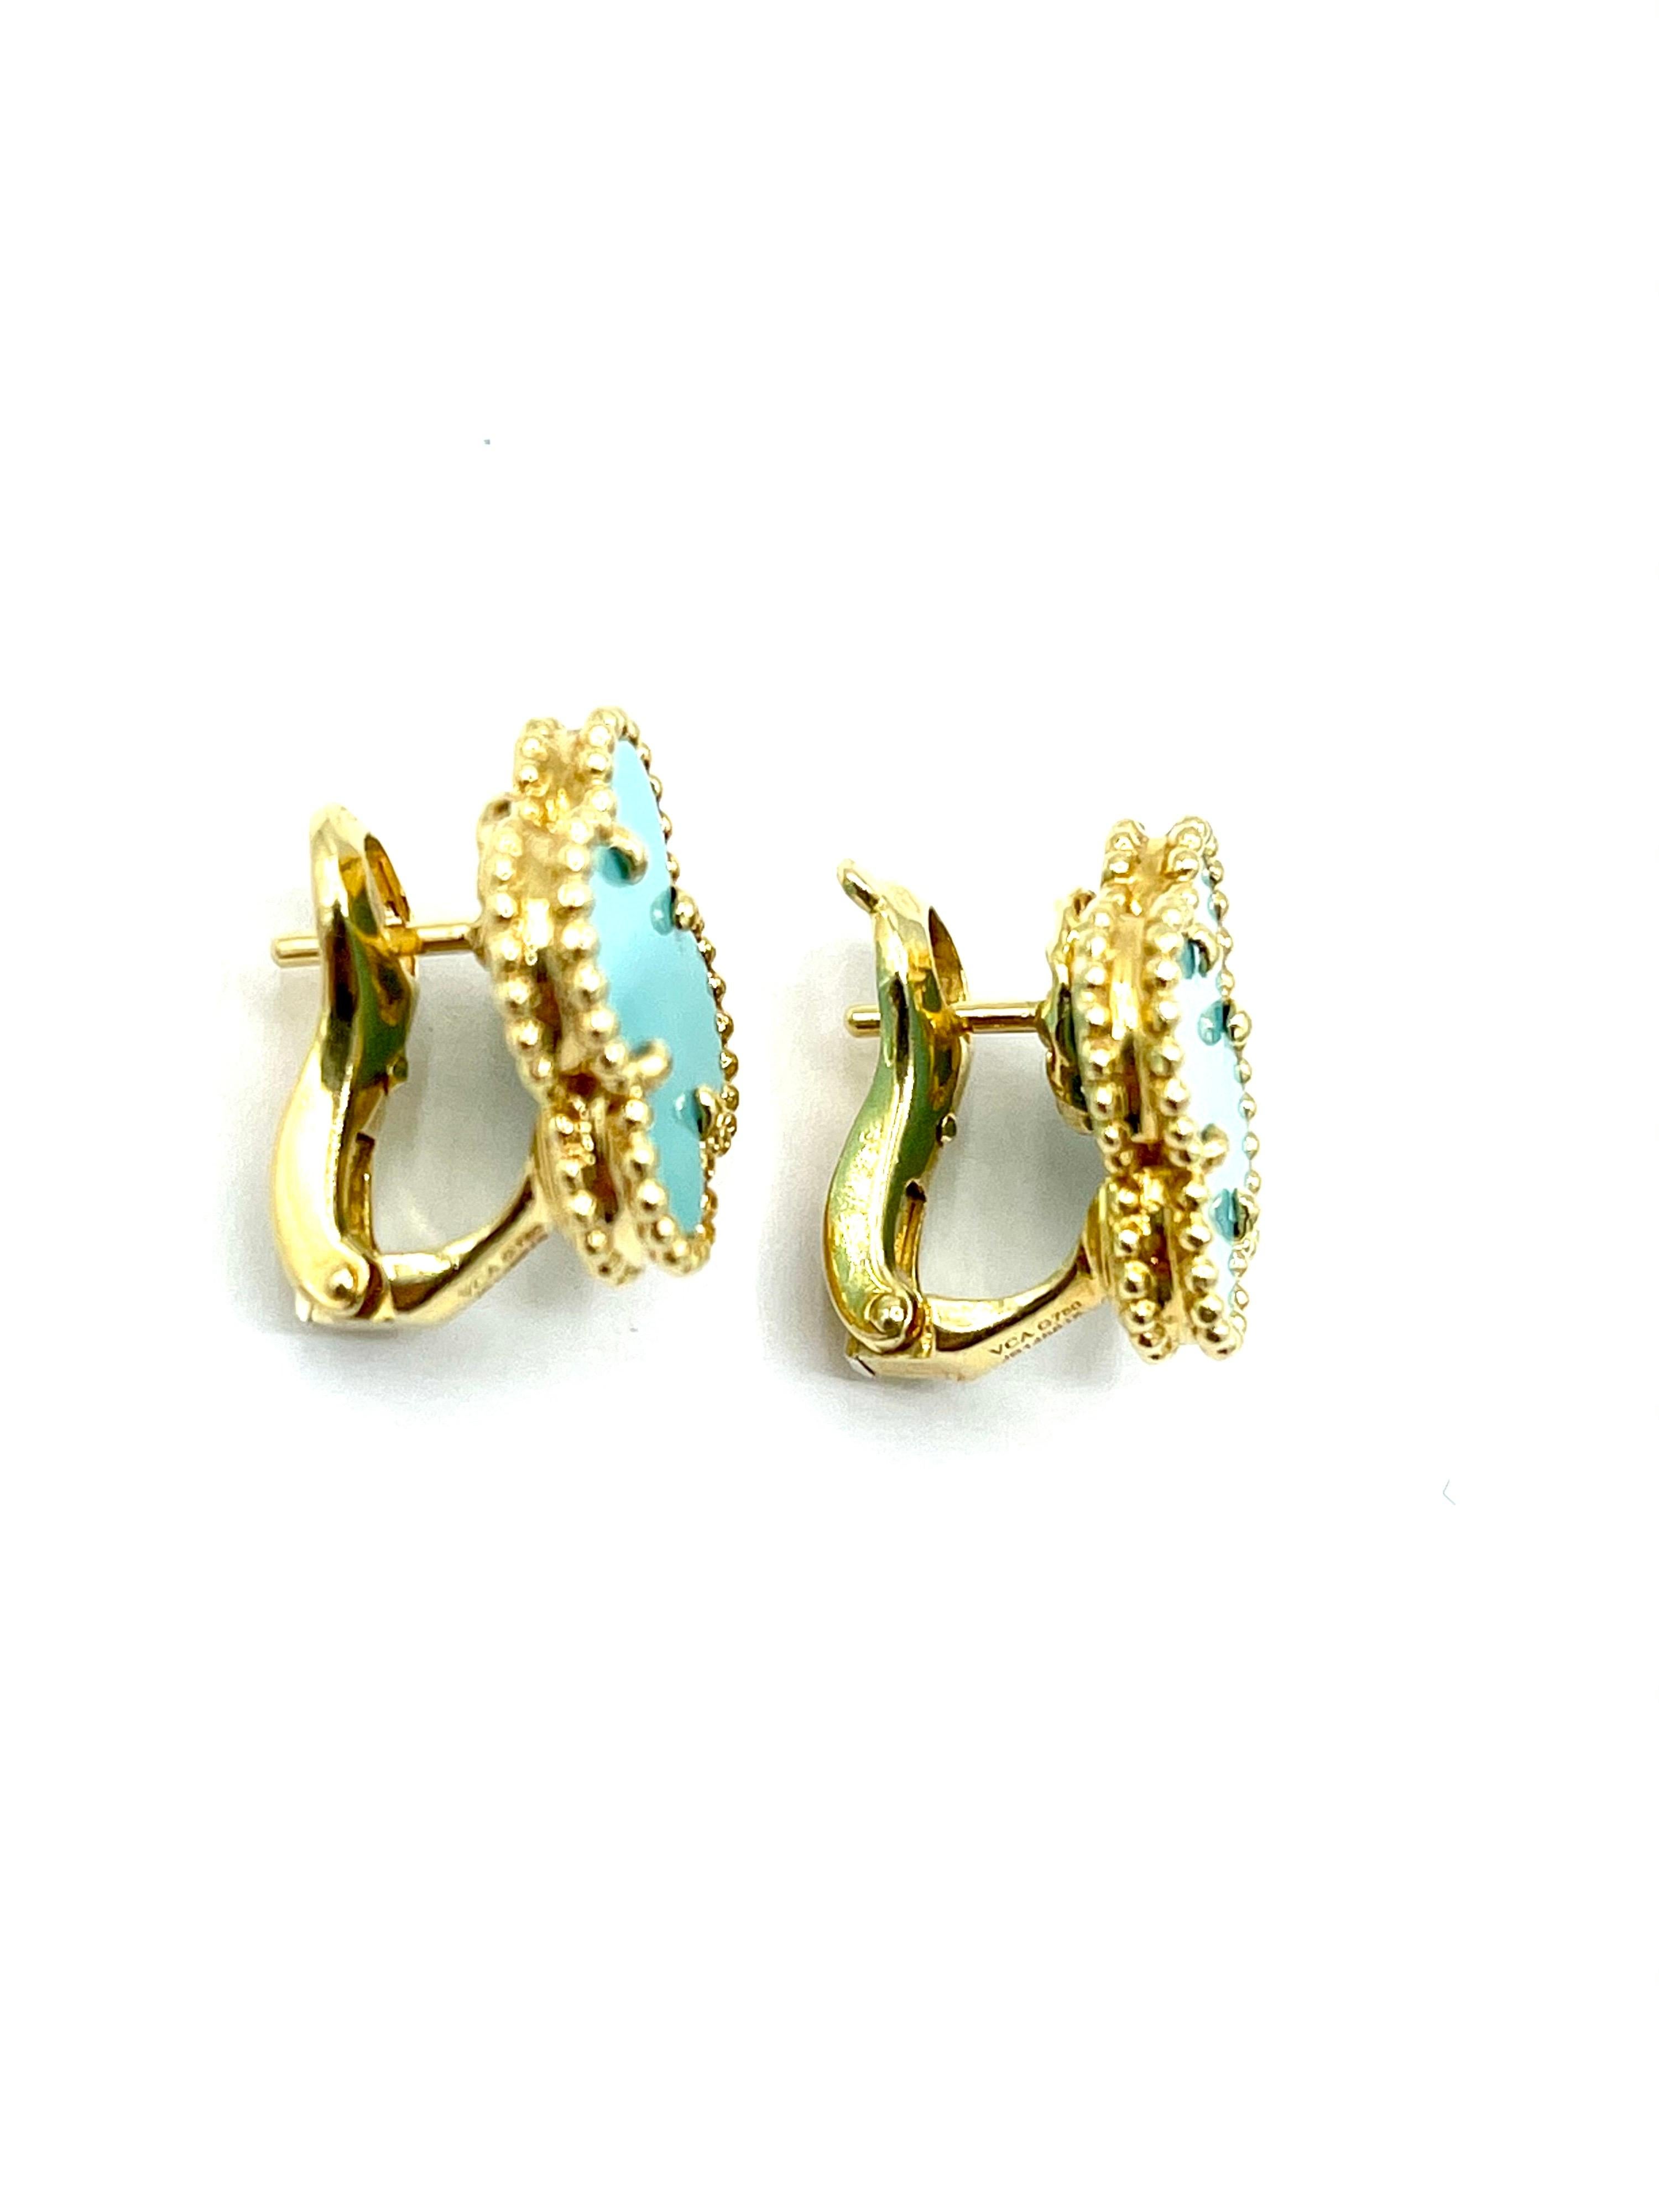 Uncut Van Cleef & Arpels Turquoise Alhambra 18K Yellow Gold Clip and Post Earrings